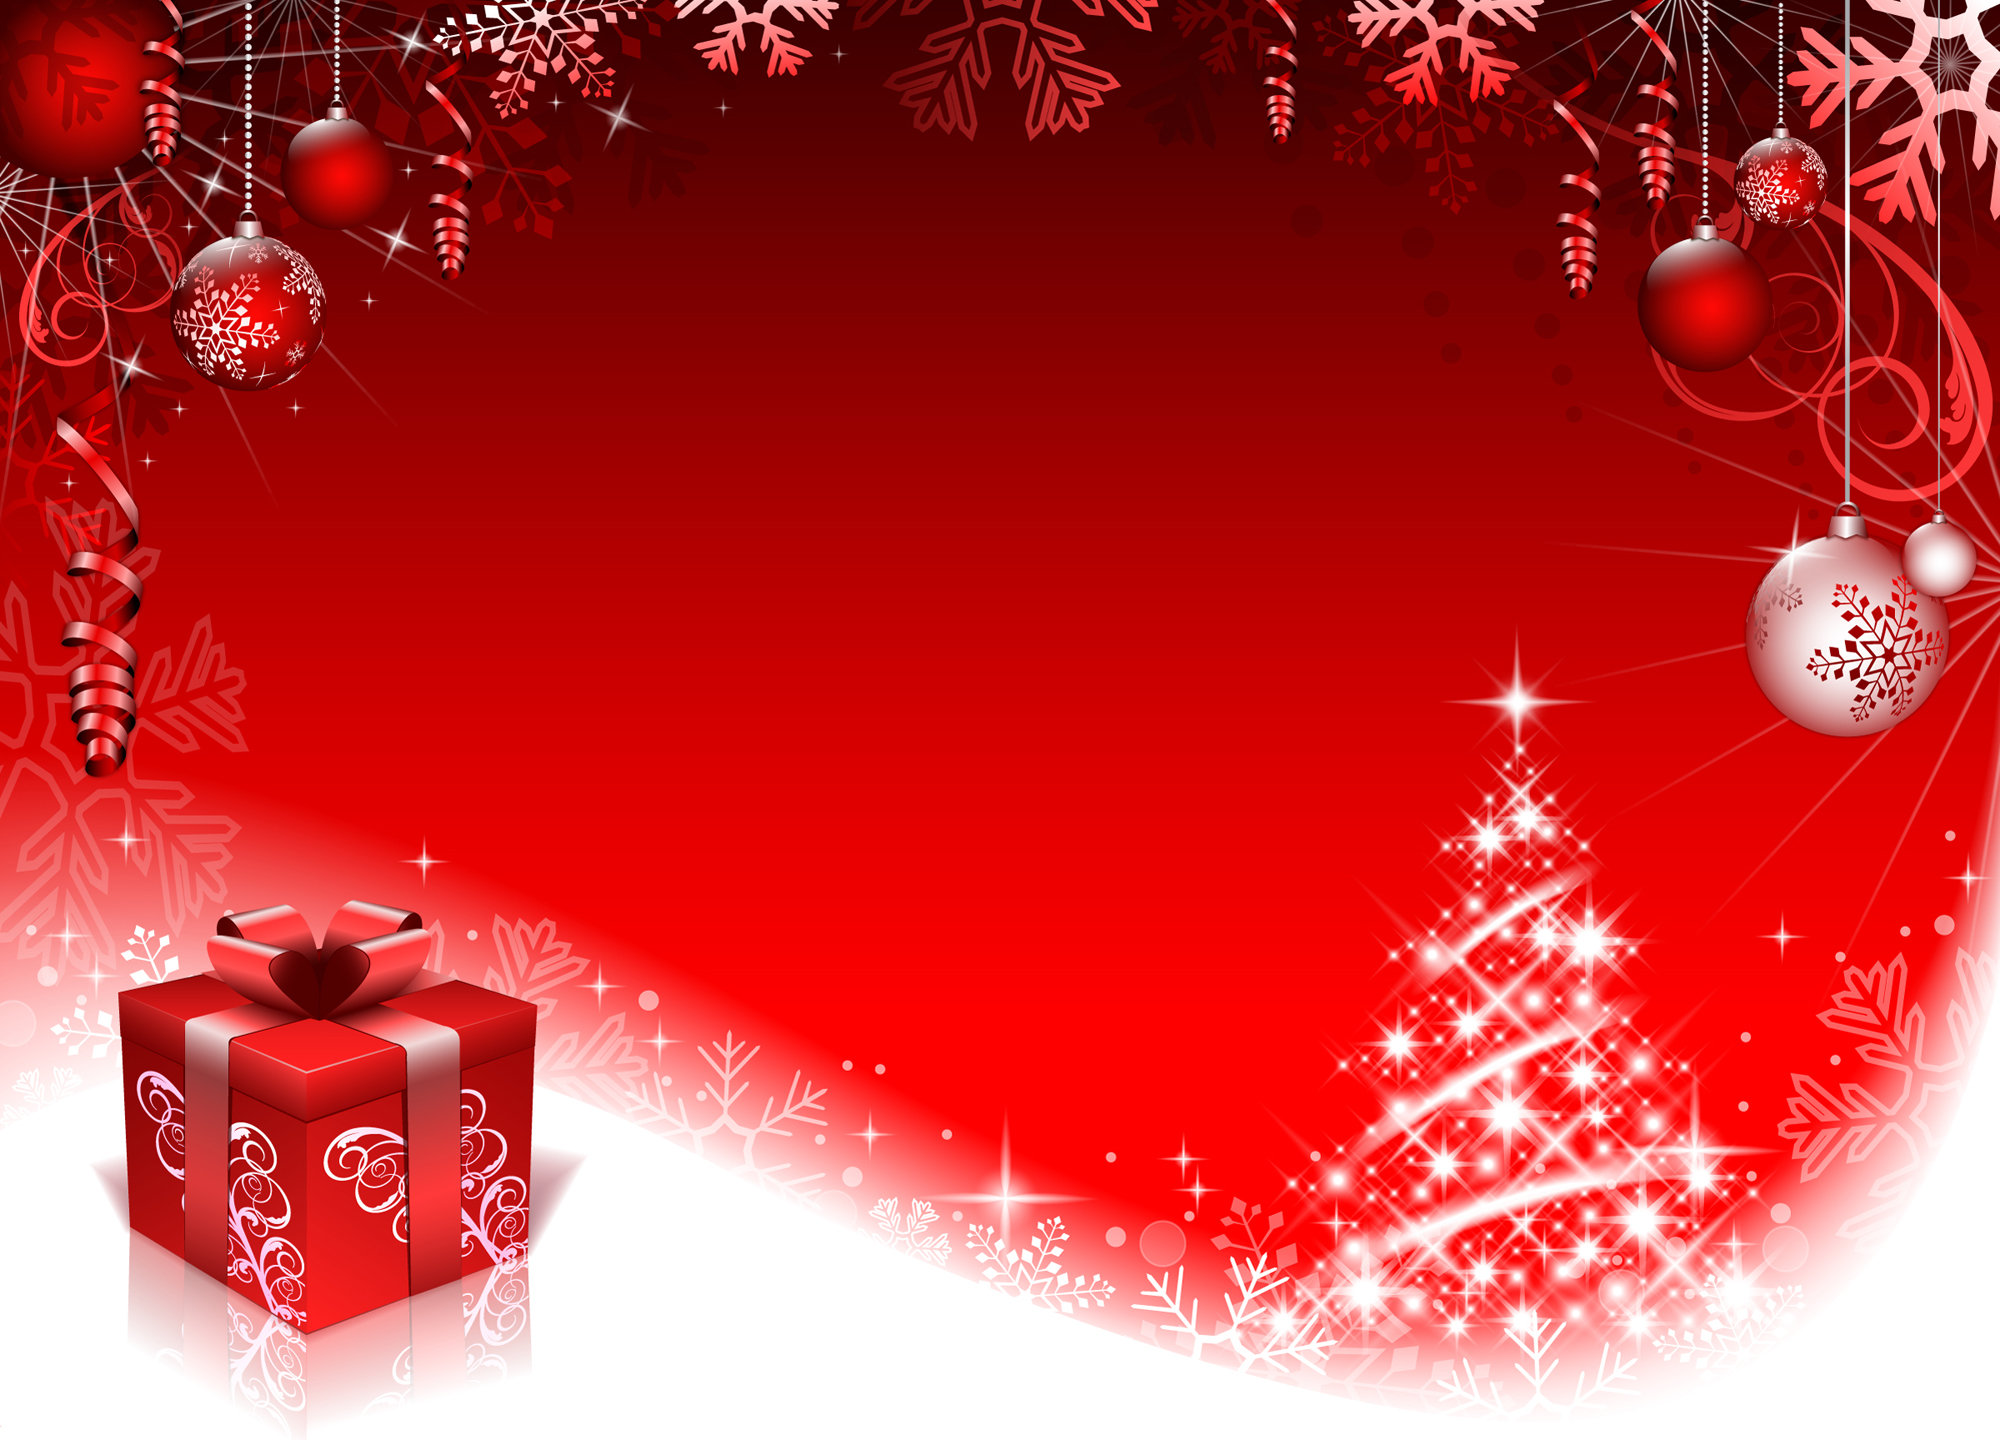 Free Red Christmas Backgrounds for Photoshop